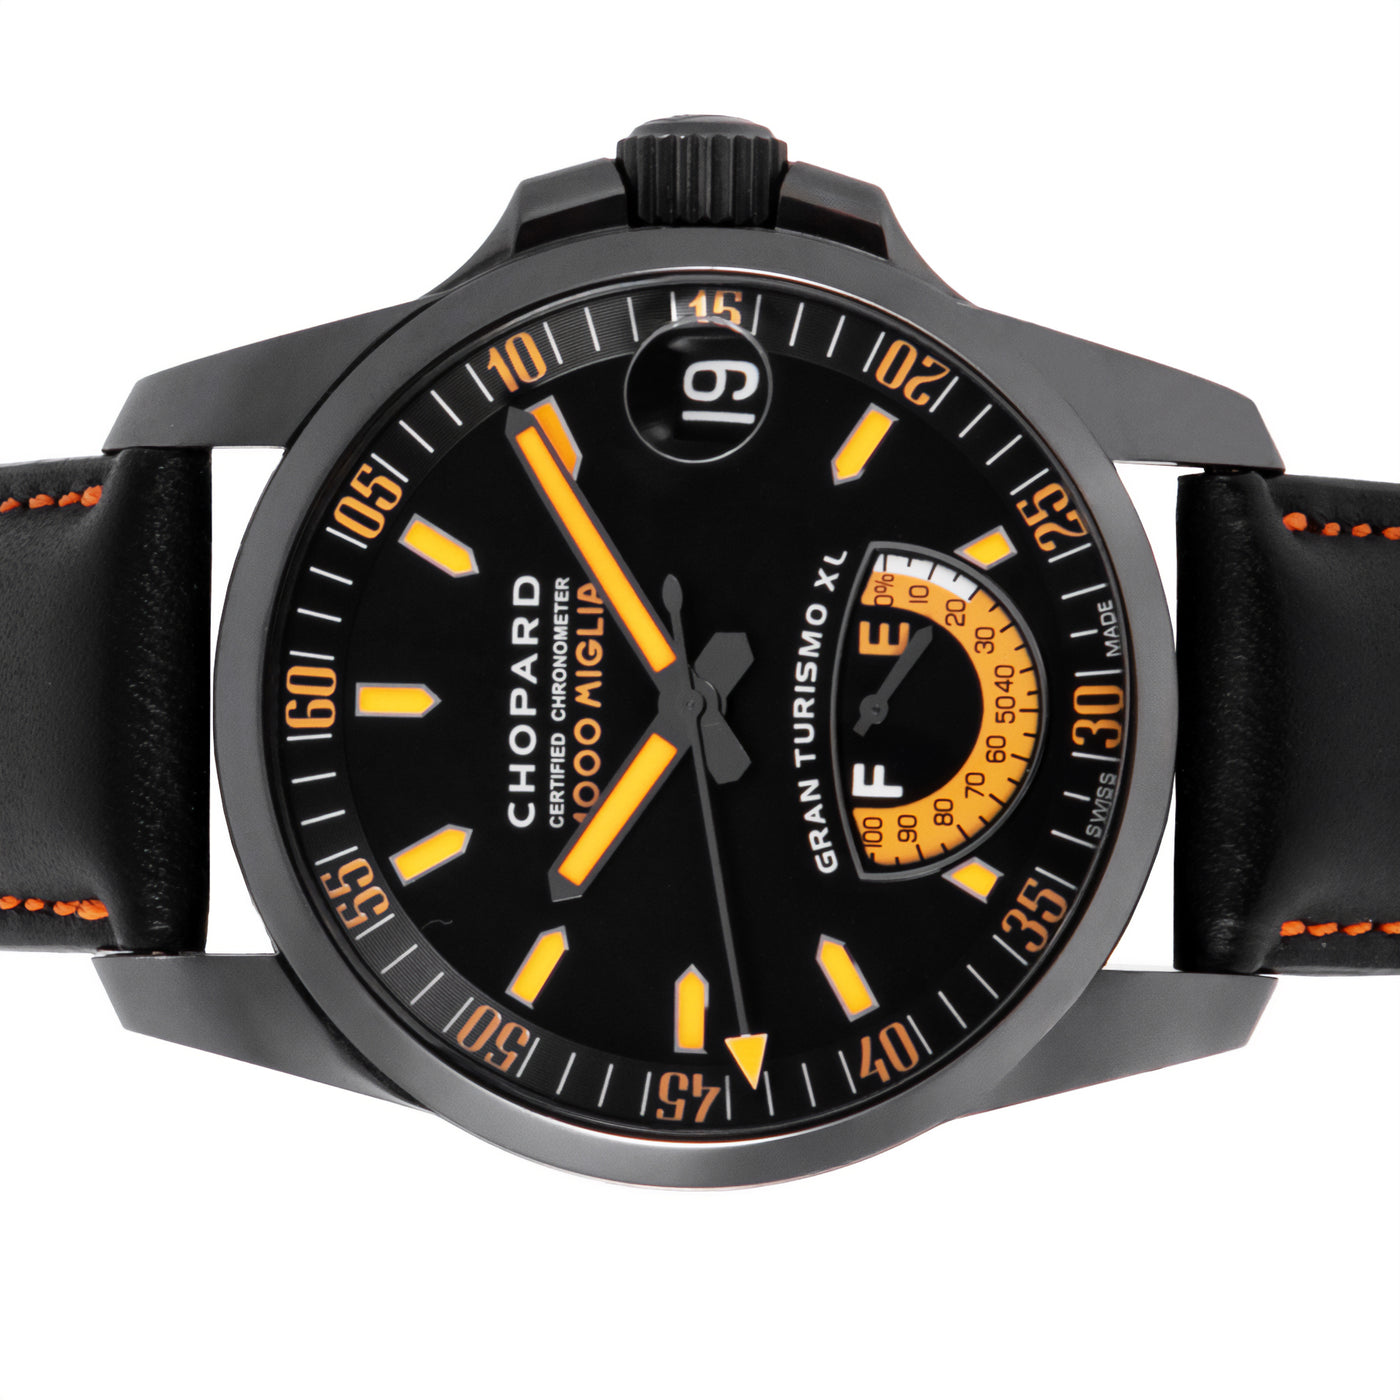 Chopard Gran Turismo XL in PVD Limited Edition 8997 | TImepiece360